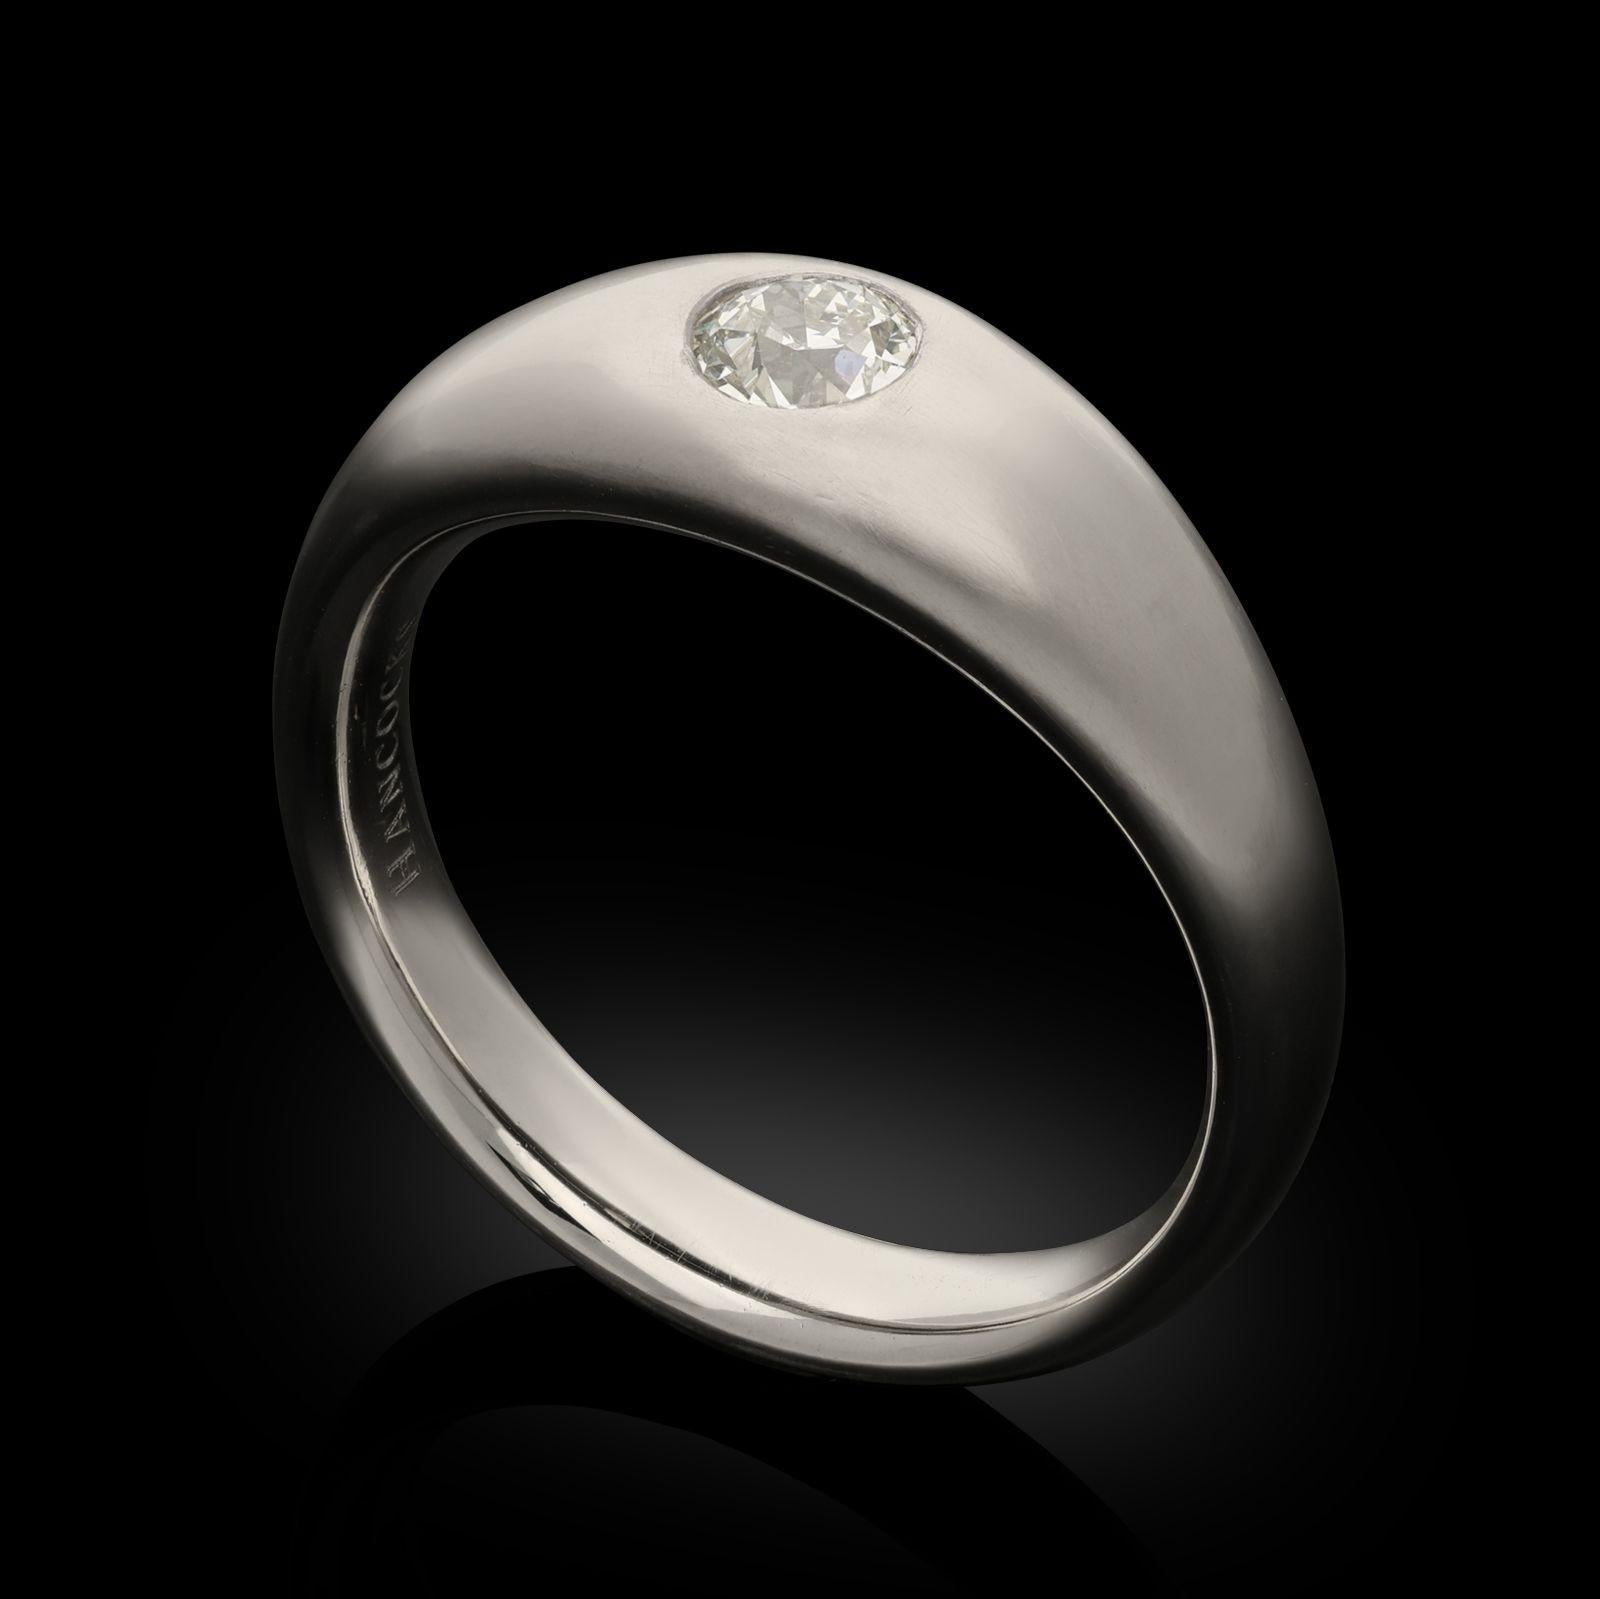 Hancocks Contemporary 0.45ct Old European Cut Diamond Band Ring in Platinum In New Condition For Sale In London, GB